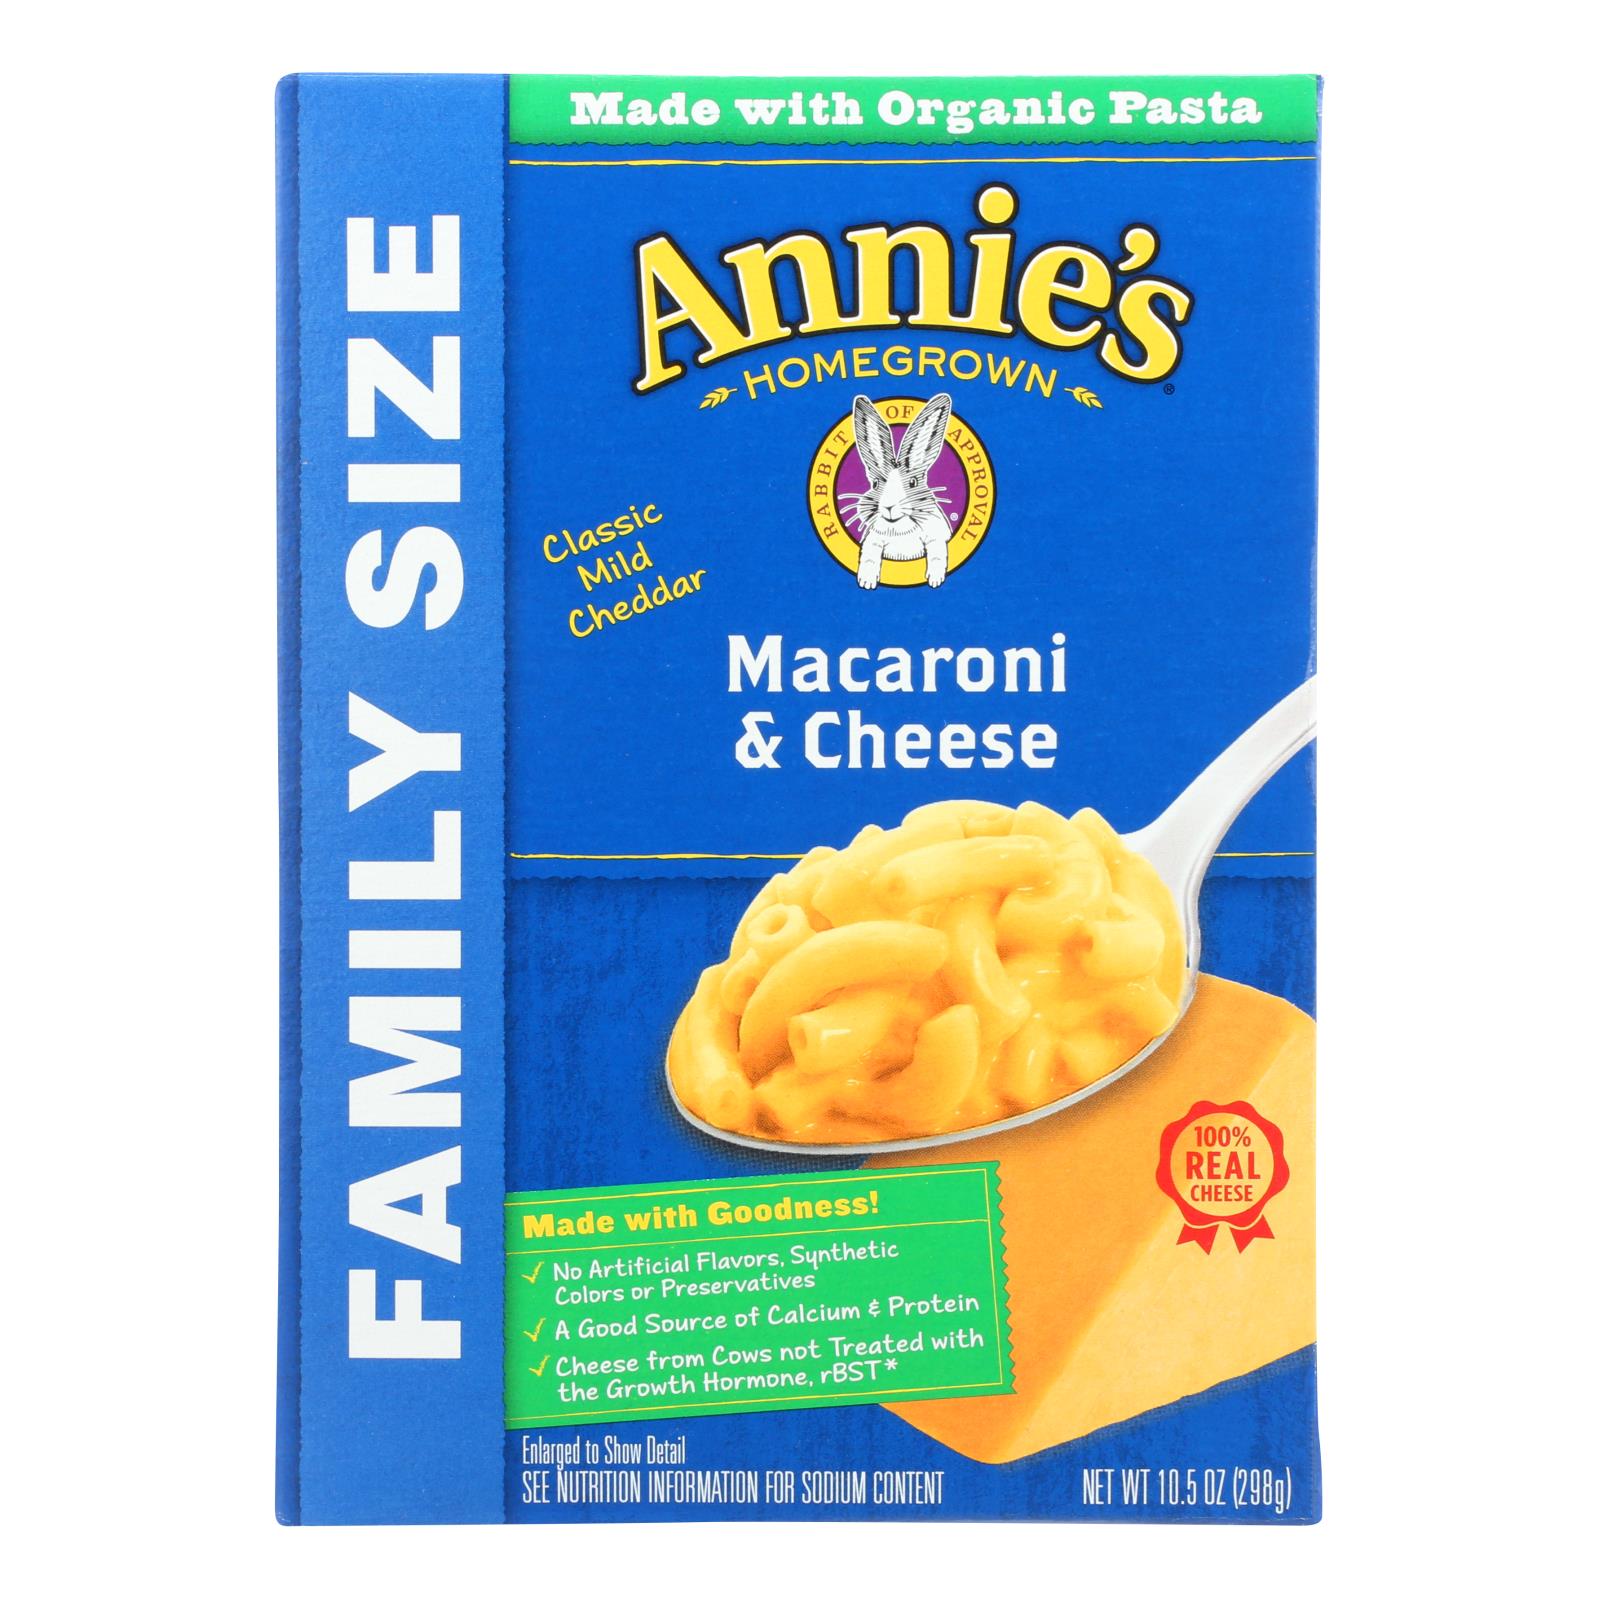 Annie'S Homegrown, Annie's Homegrown Classic Family Size Macaroni and Cheese - Case of 6 - 10.5 oz. (Pack of 6)